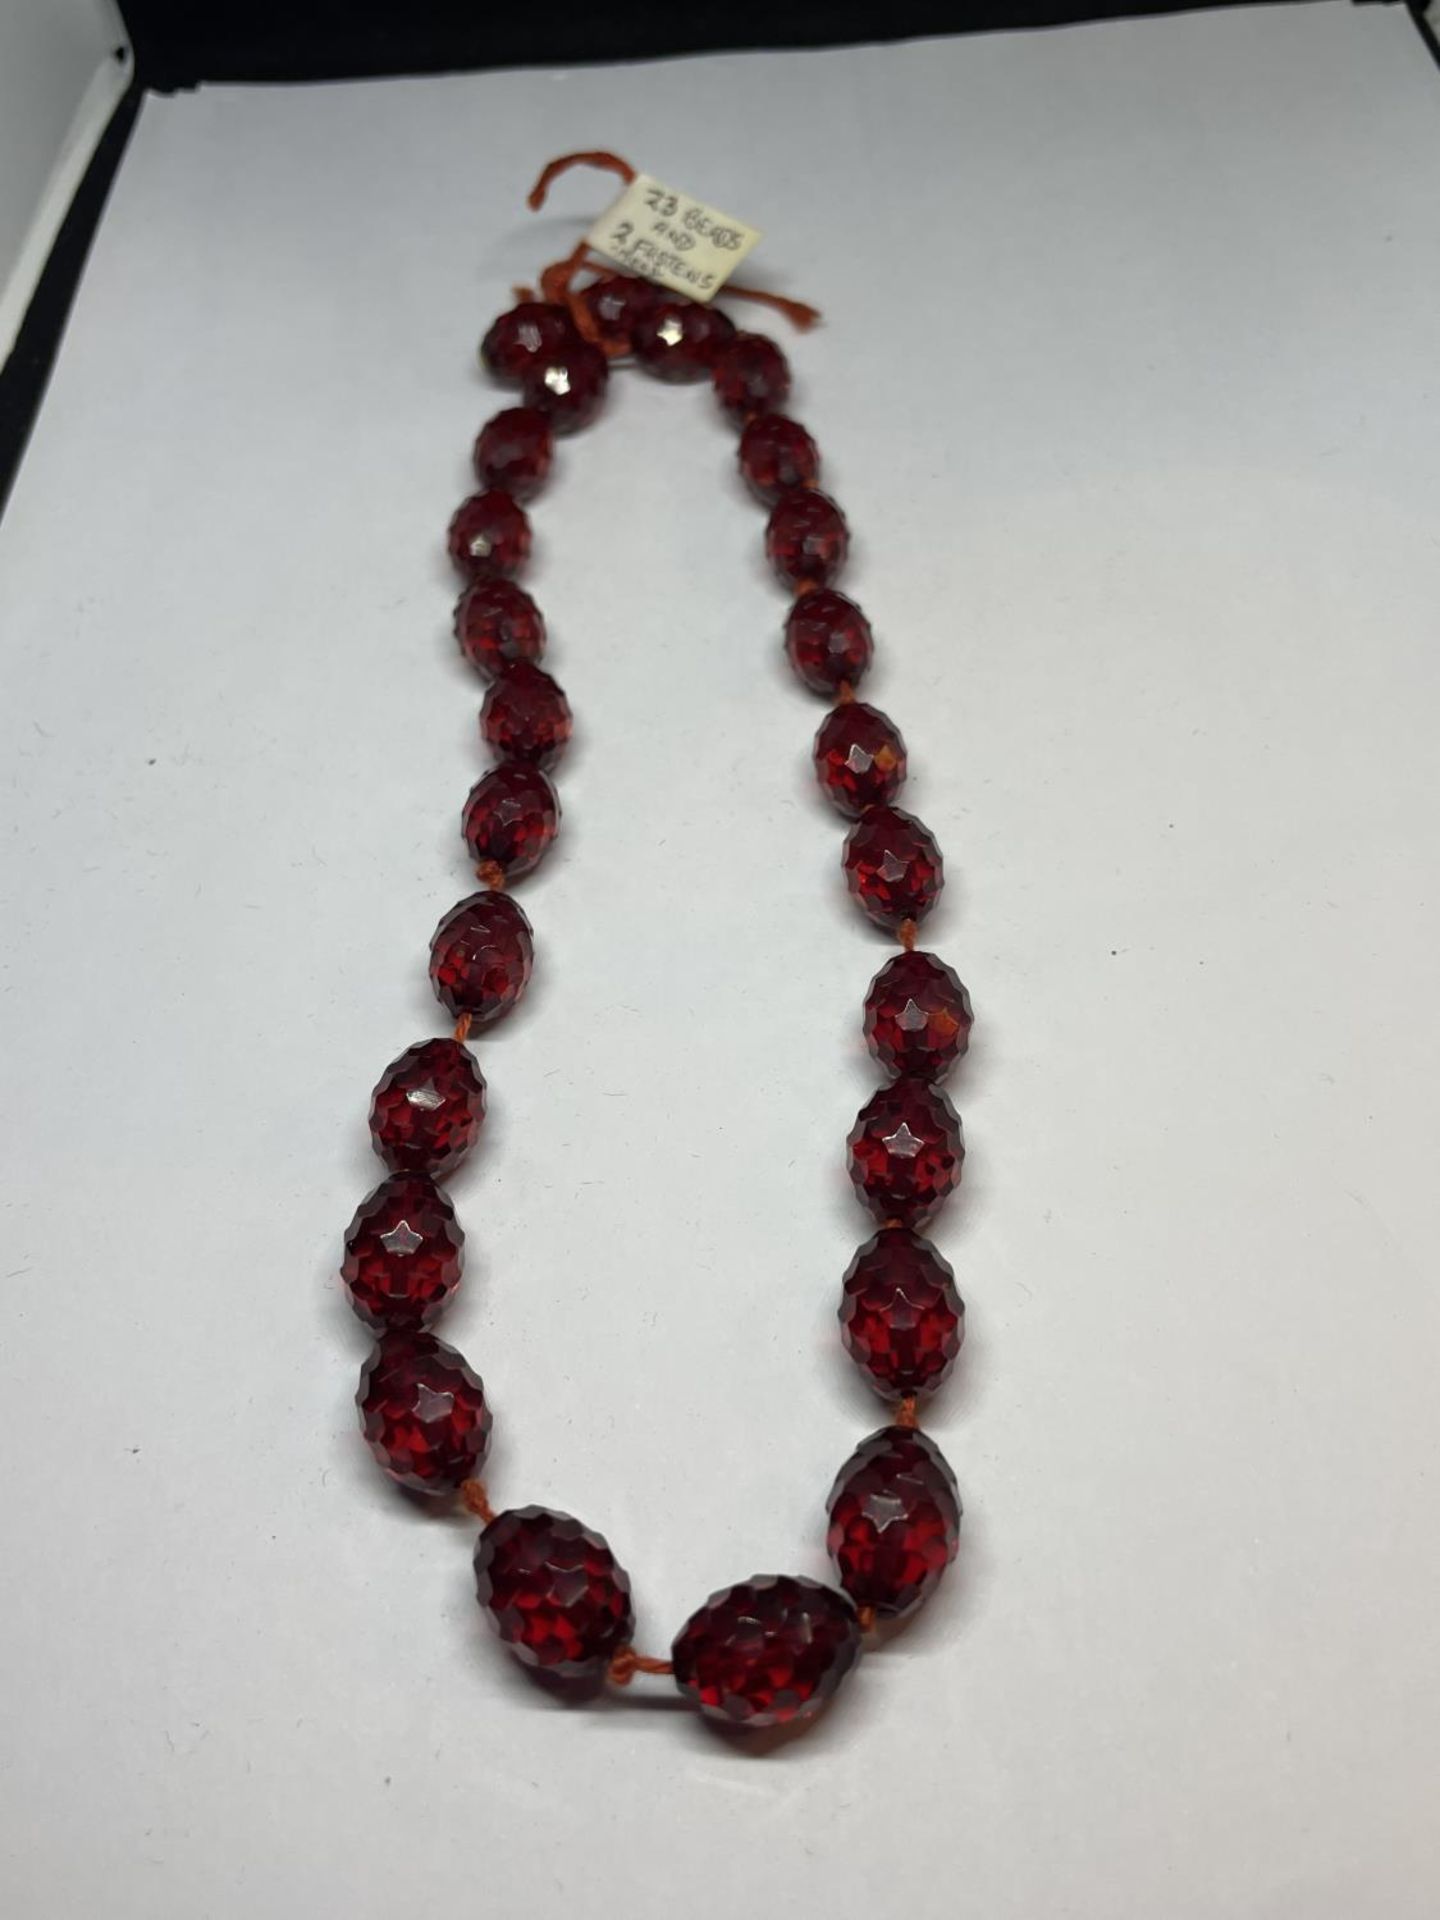 AN AMBER EFFECT BEADED NECKLACE WITH TWENTY THREE BEADS AND TWO FASTNER BEADS